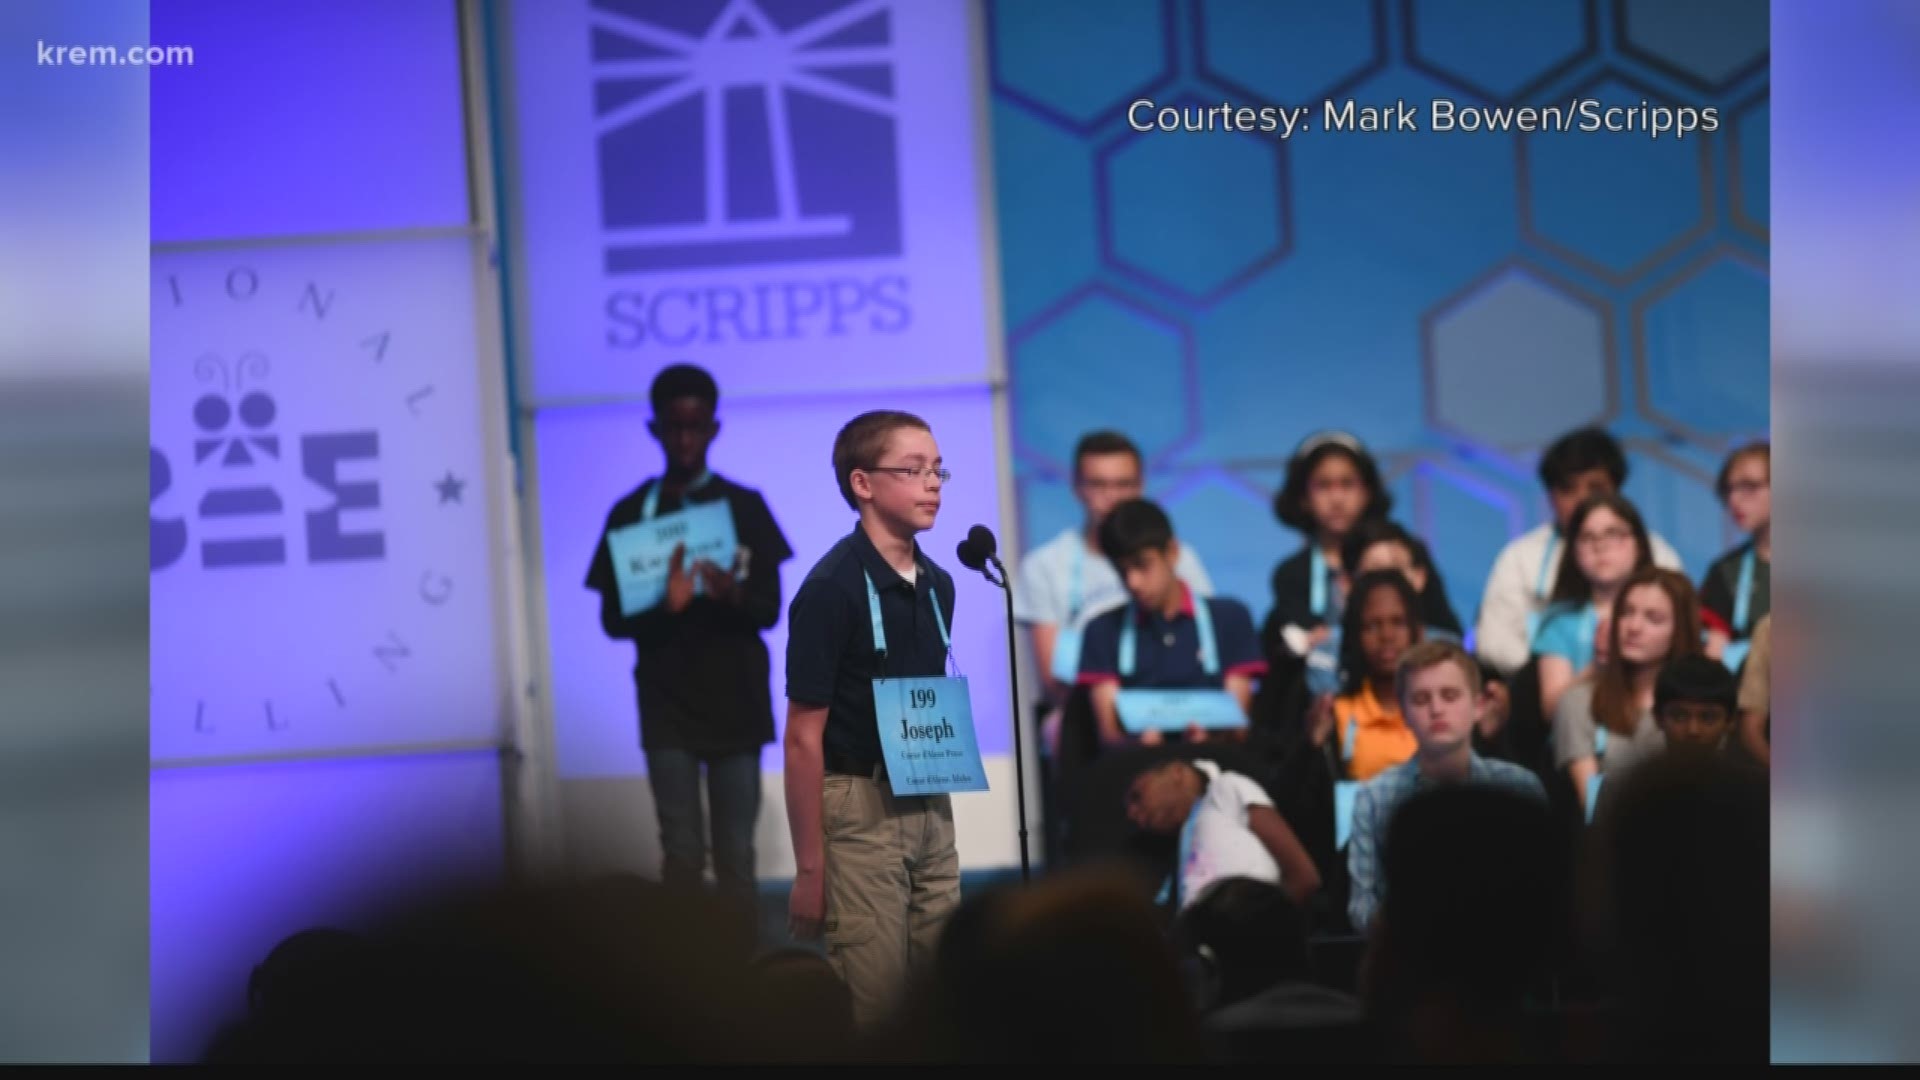 Joseph Moran first won a North Idaho regional spelling bee in Coeur d'Alene, eventually becoming one of four young spellers from Idaho to compete at nationals.